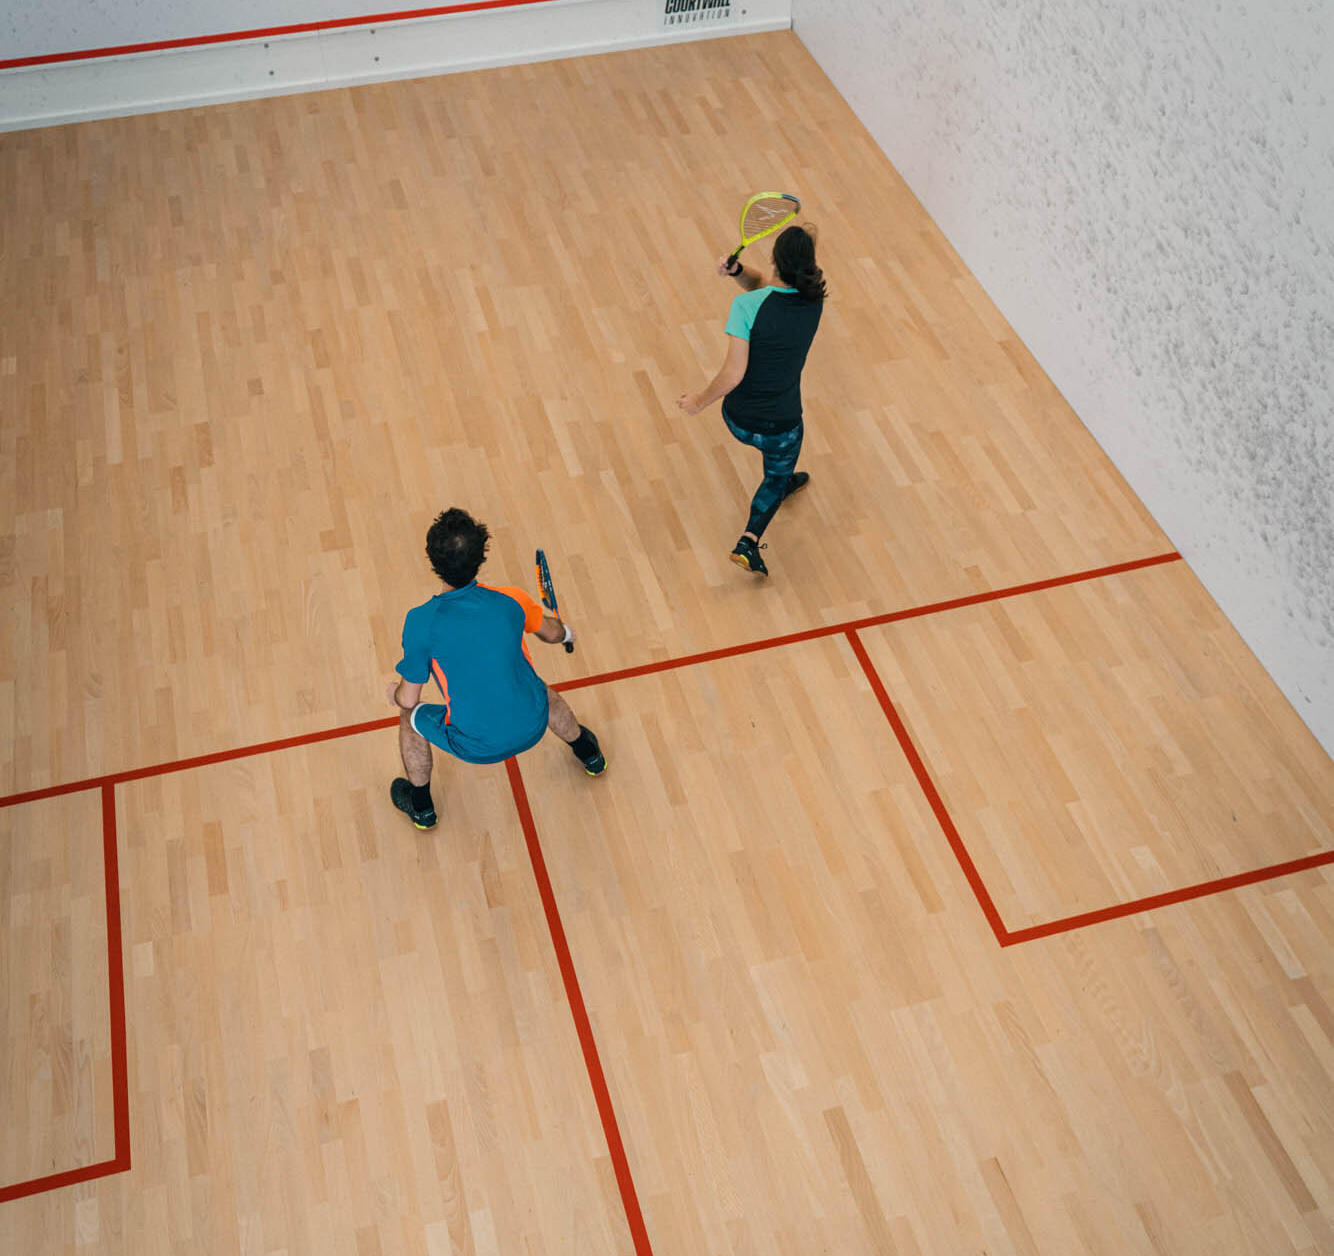 Discover squash, a sport mix of endurance and agility